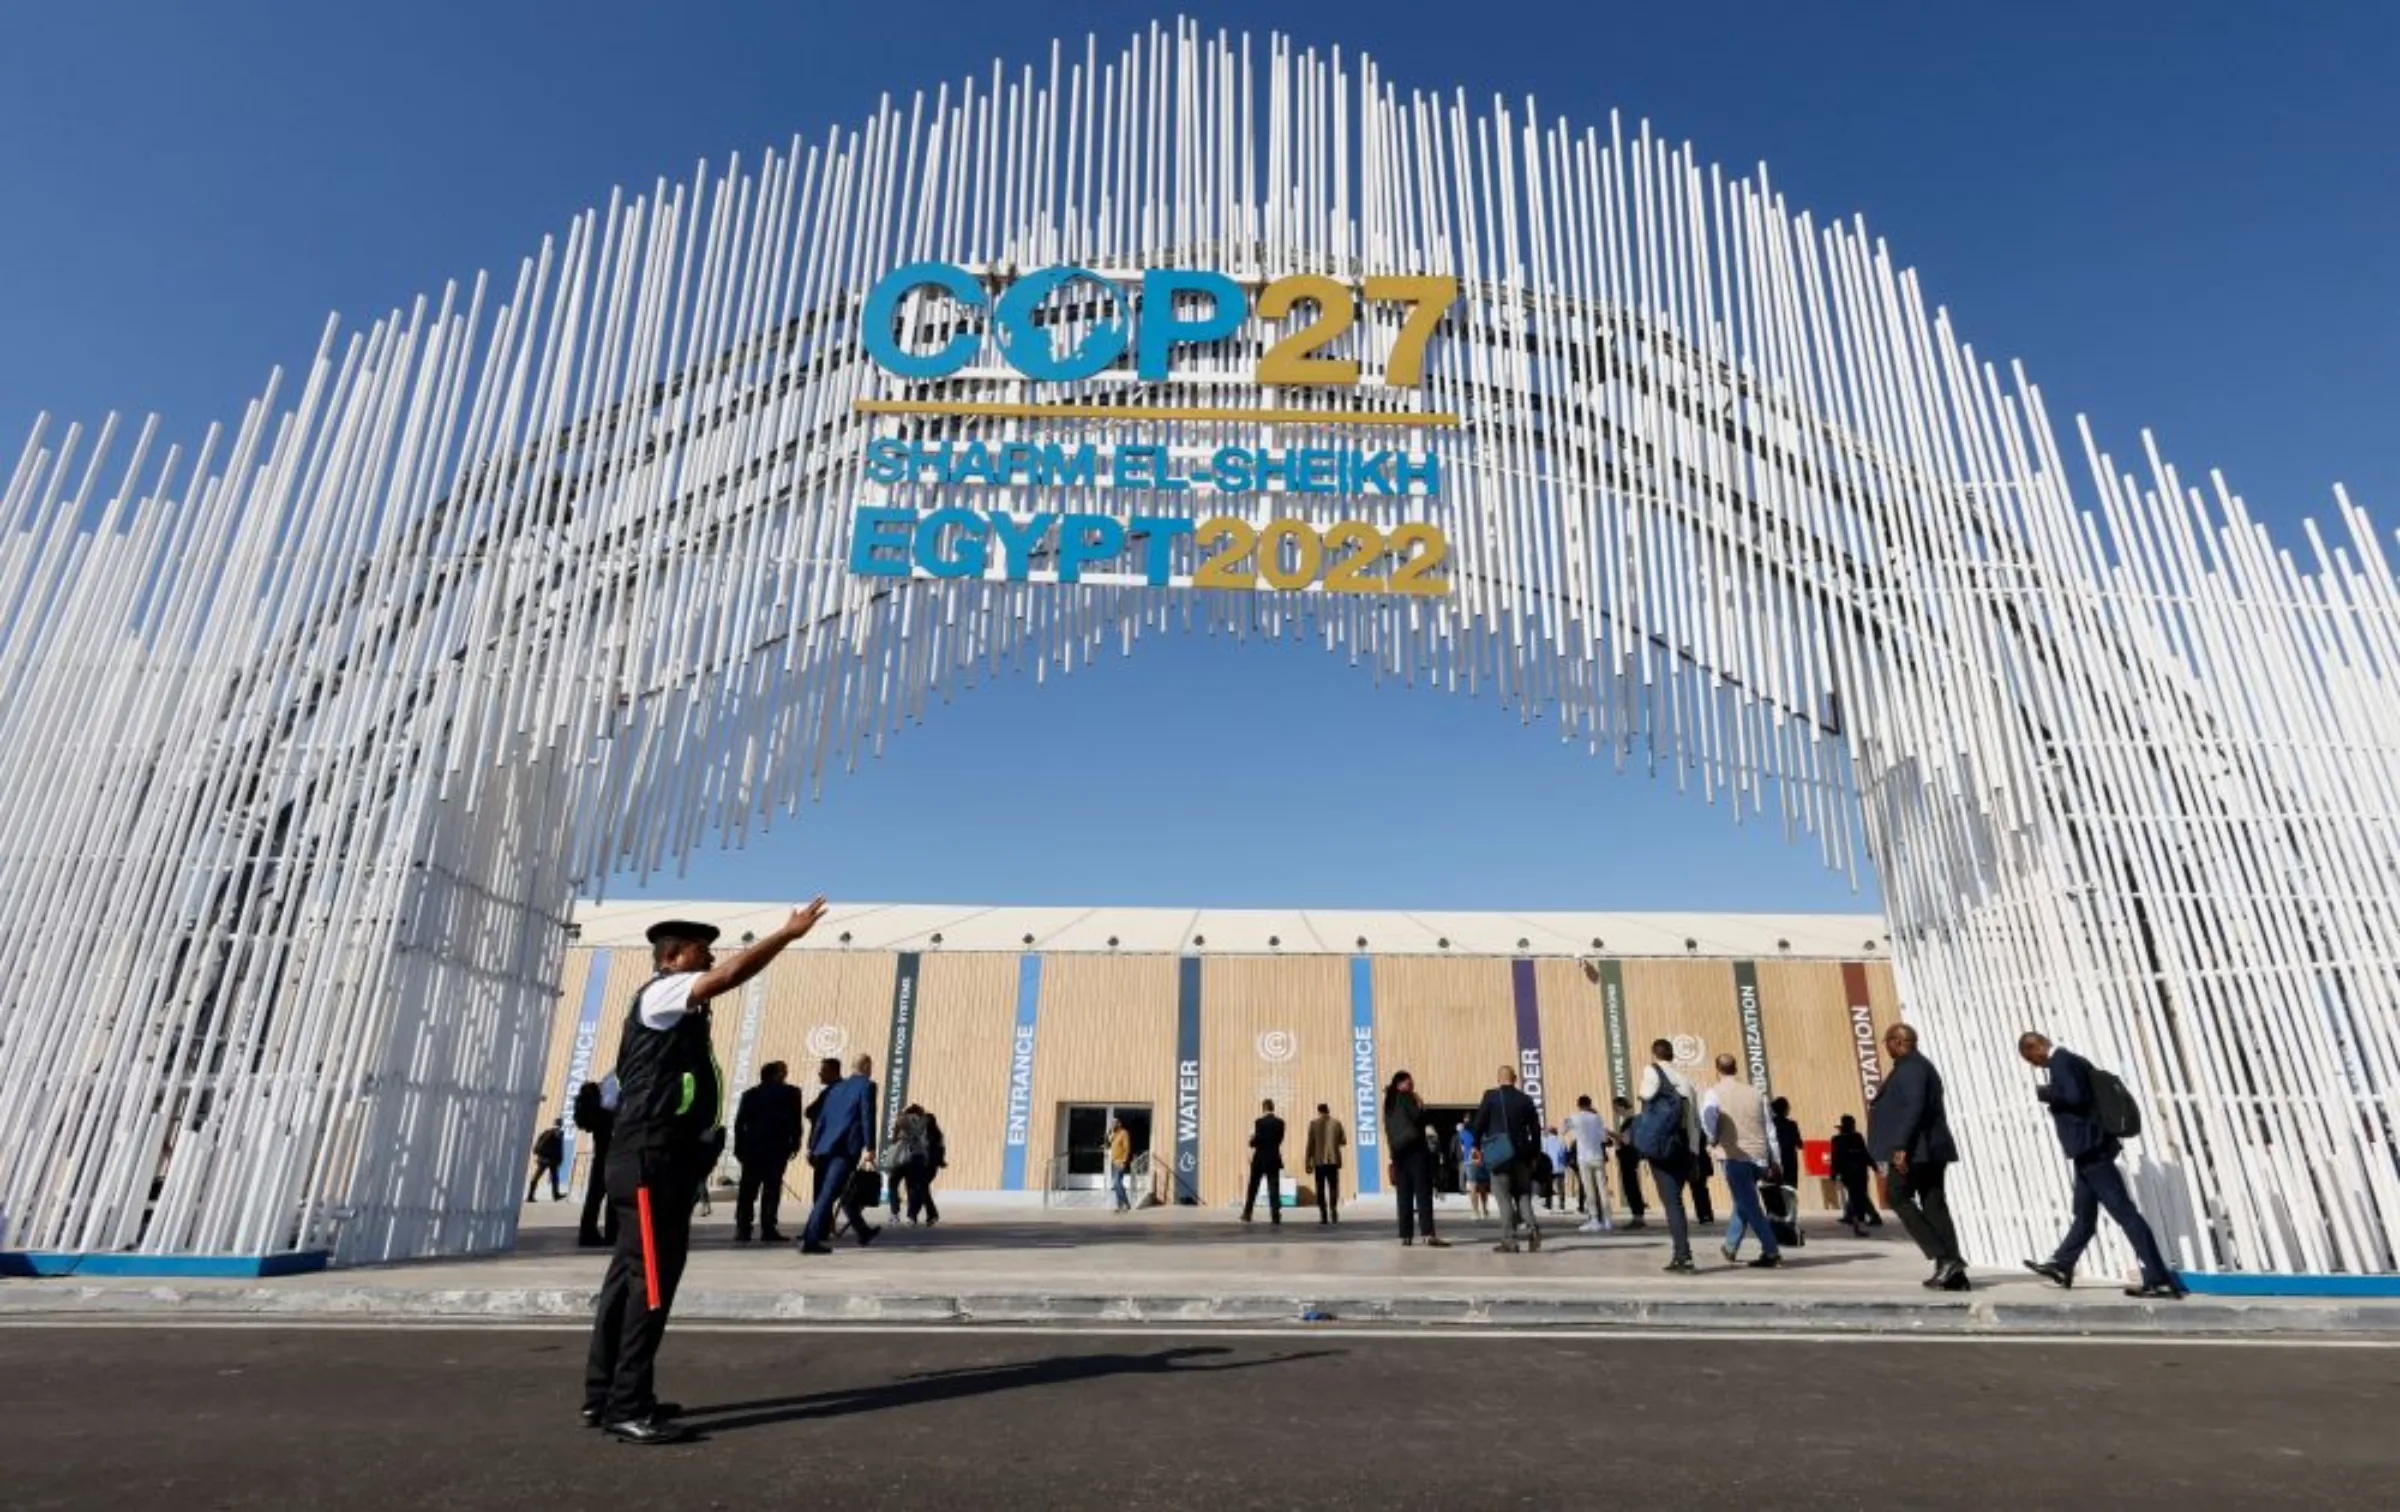 A police officer stands in front of the entrance of the Sharm El Sheikh International Convention Centre during the COP27 climate summit in Egypt's Red Sea resort of Sharm el-Sheikh, Egypt November 9, 2022